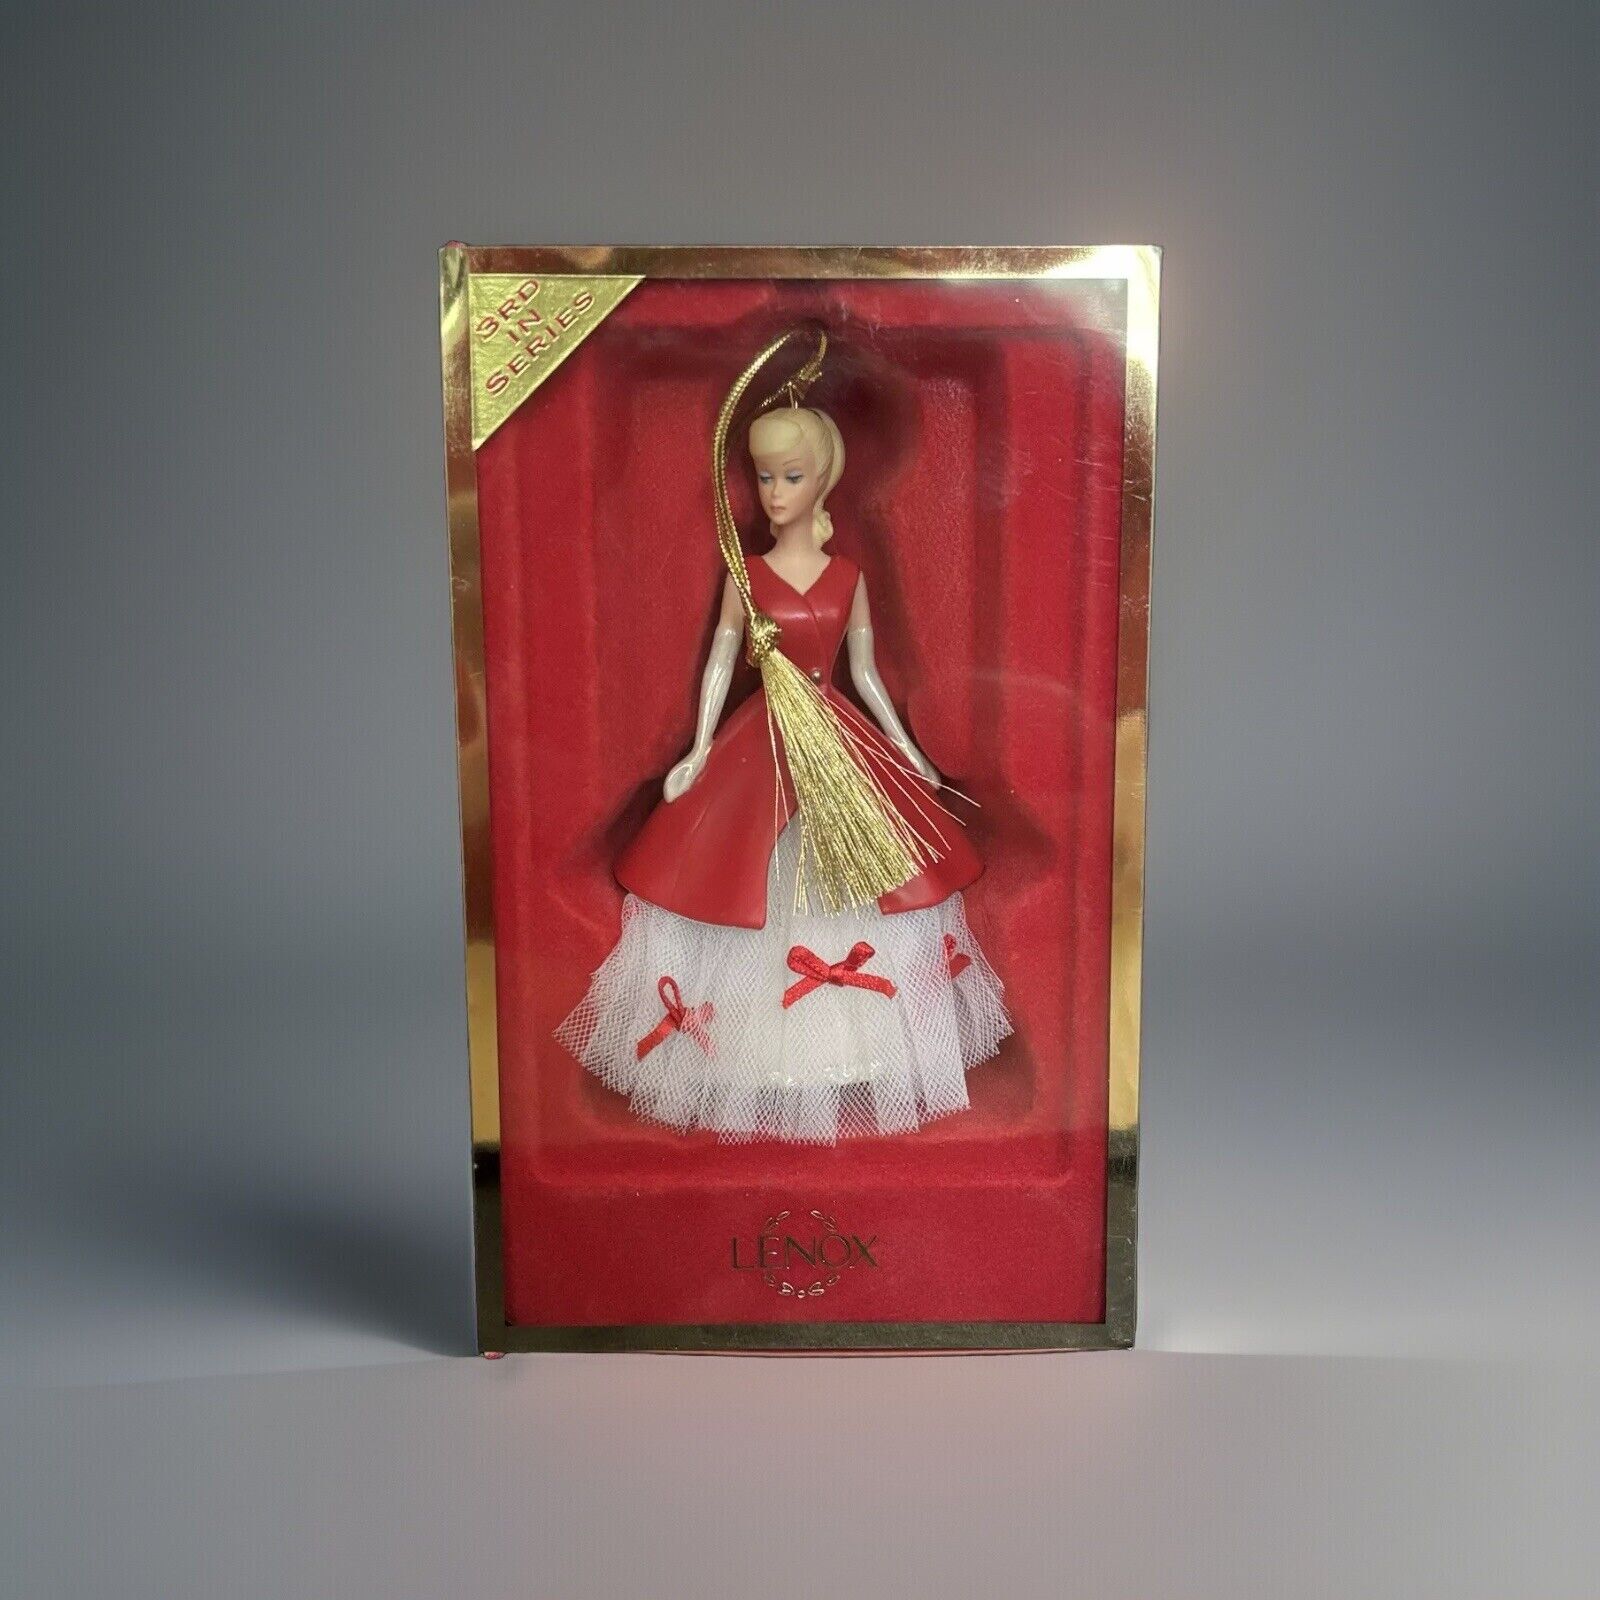 Lenox 2005 Barbie Porcelain Holiday Dance Christmas Ornament “3rd in Series”